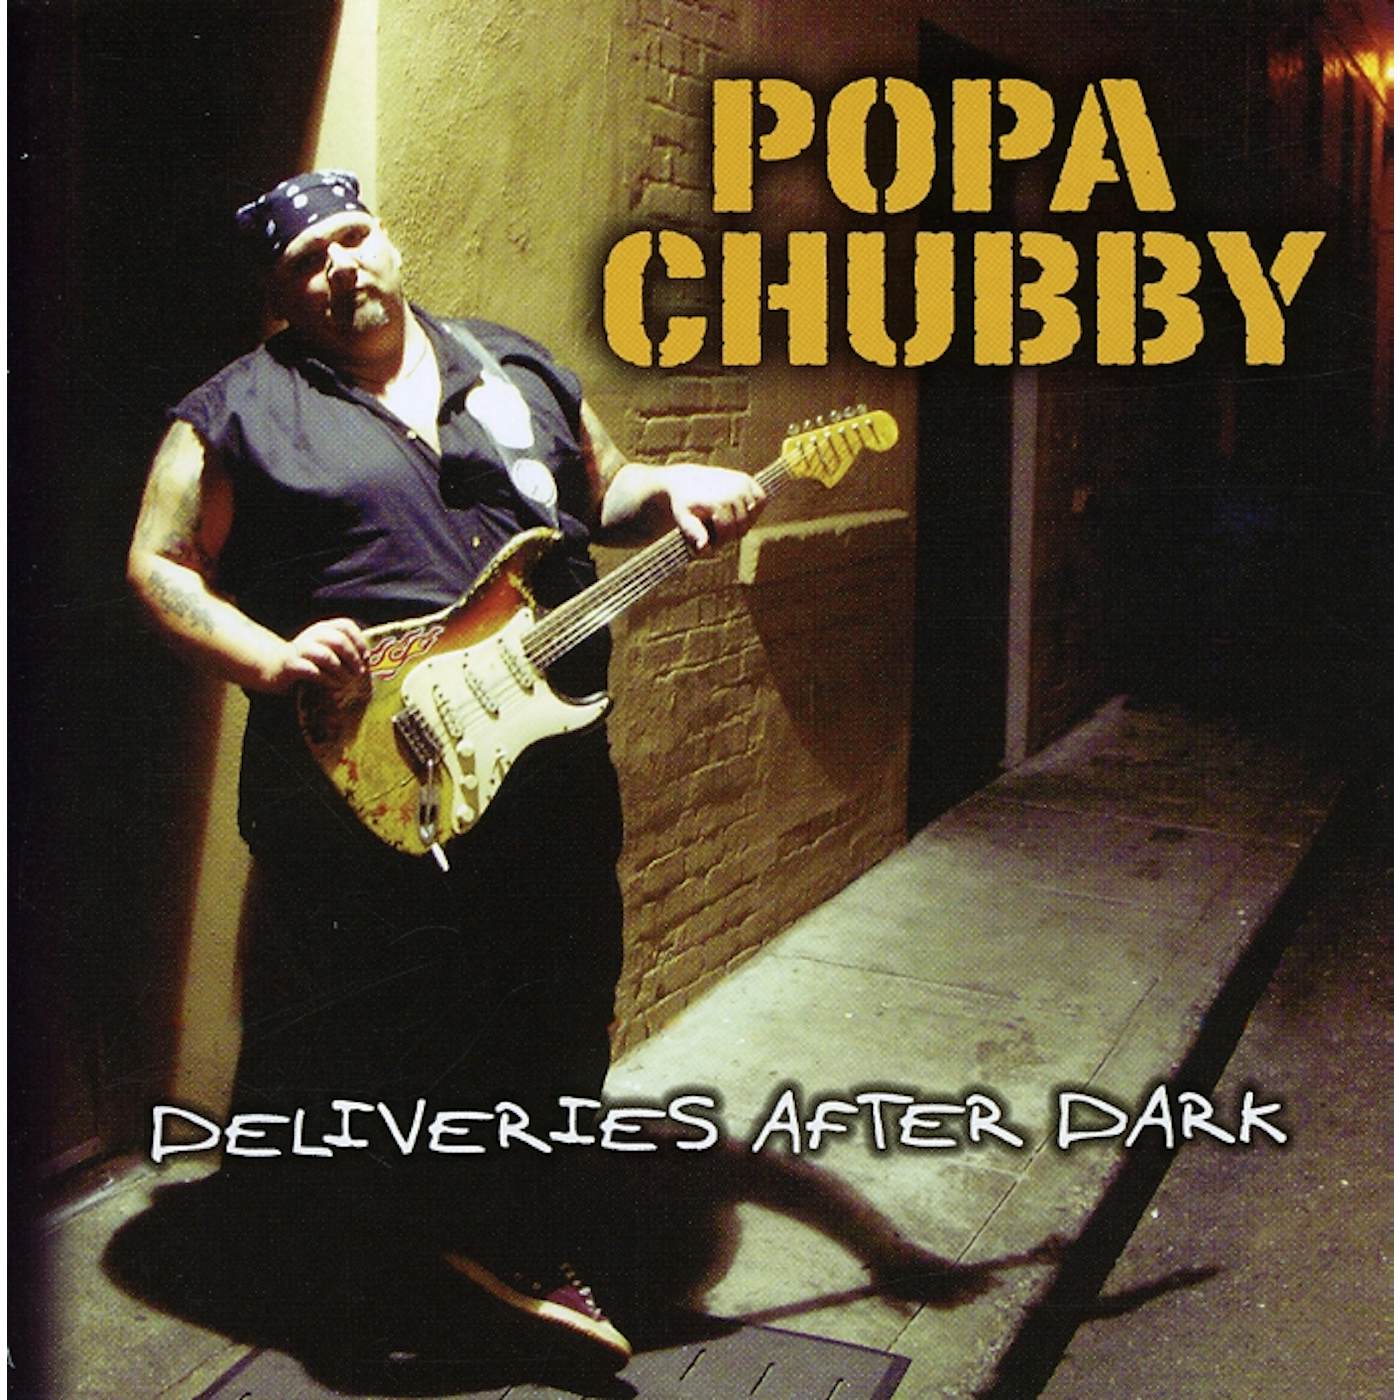 Popa Chubby DELIVERIES AFTER DARK CD